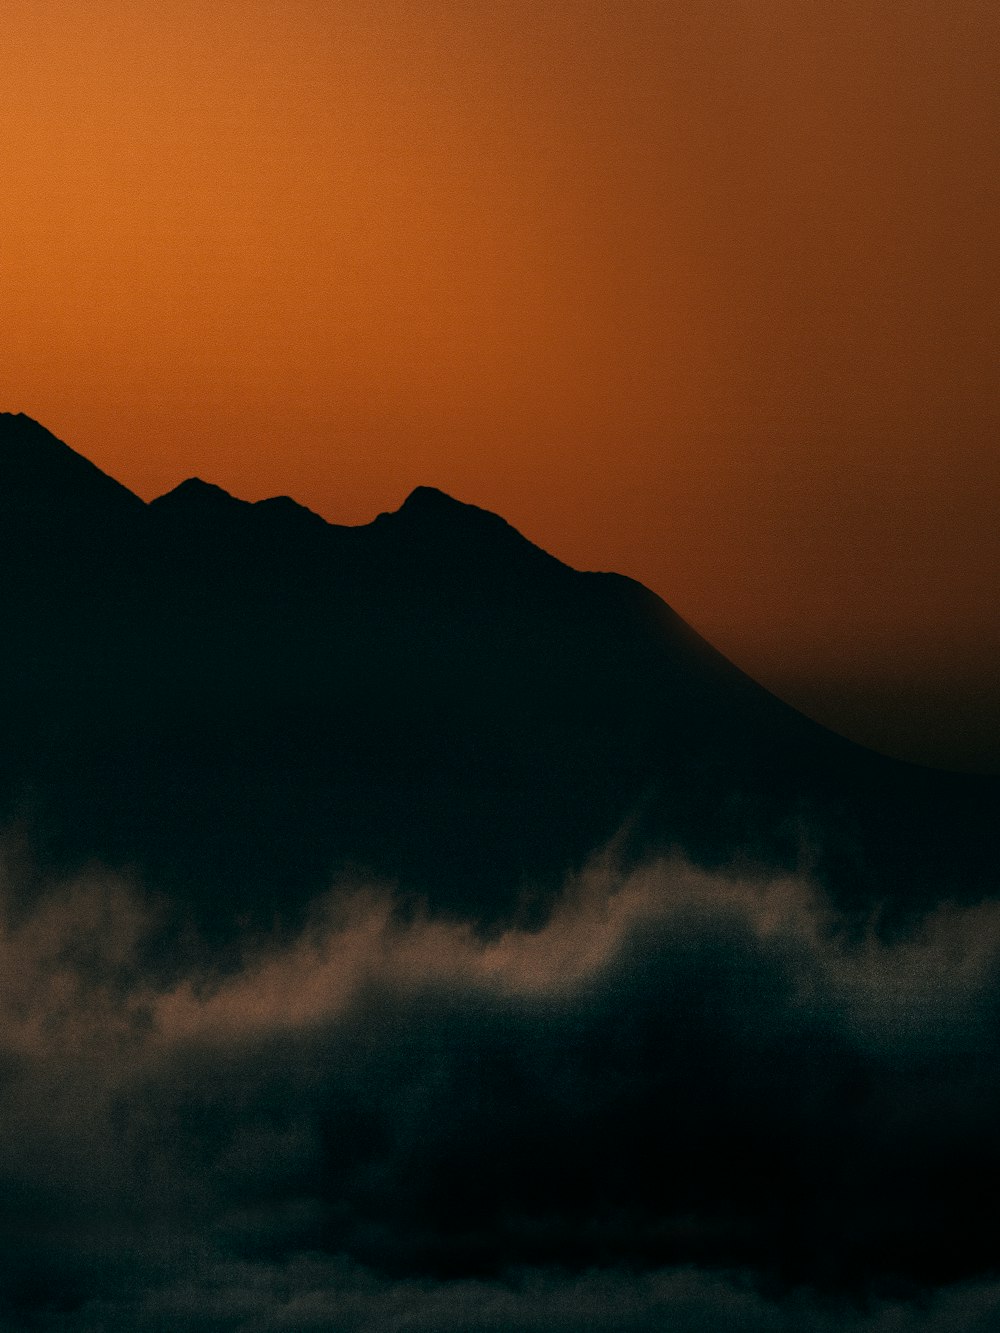 silhouette of mountain under cloudy sky during daytime